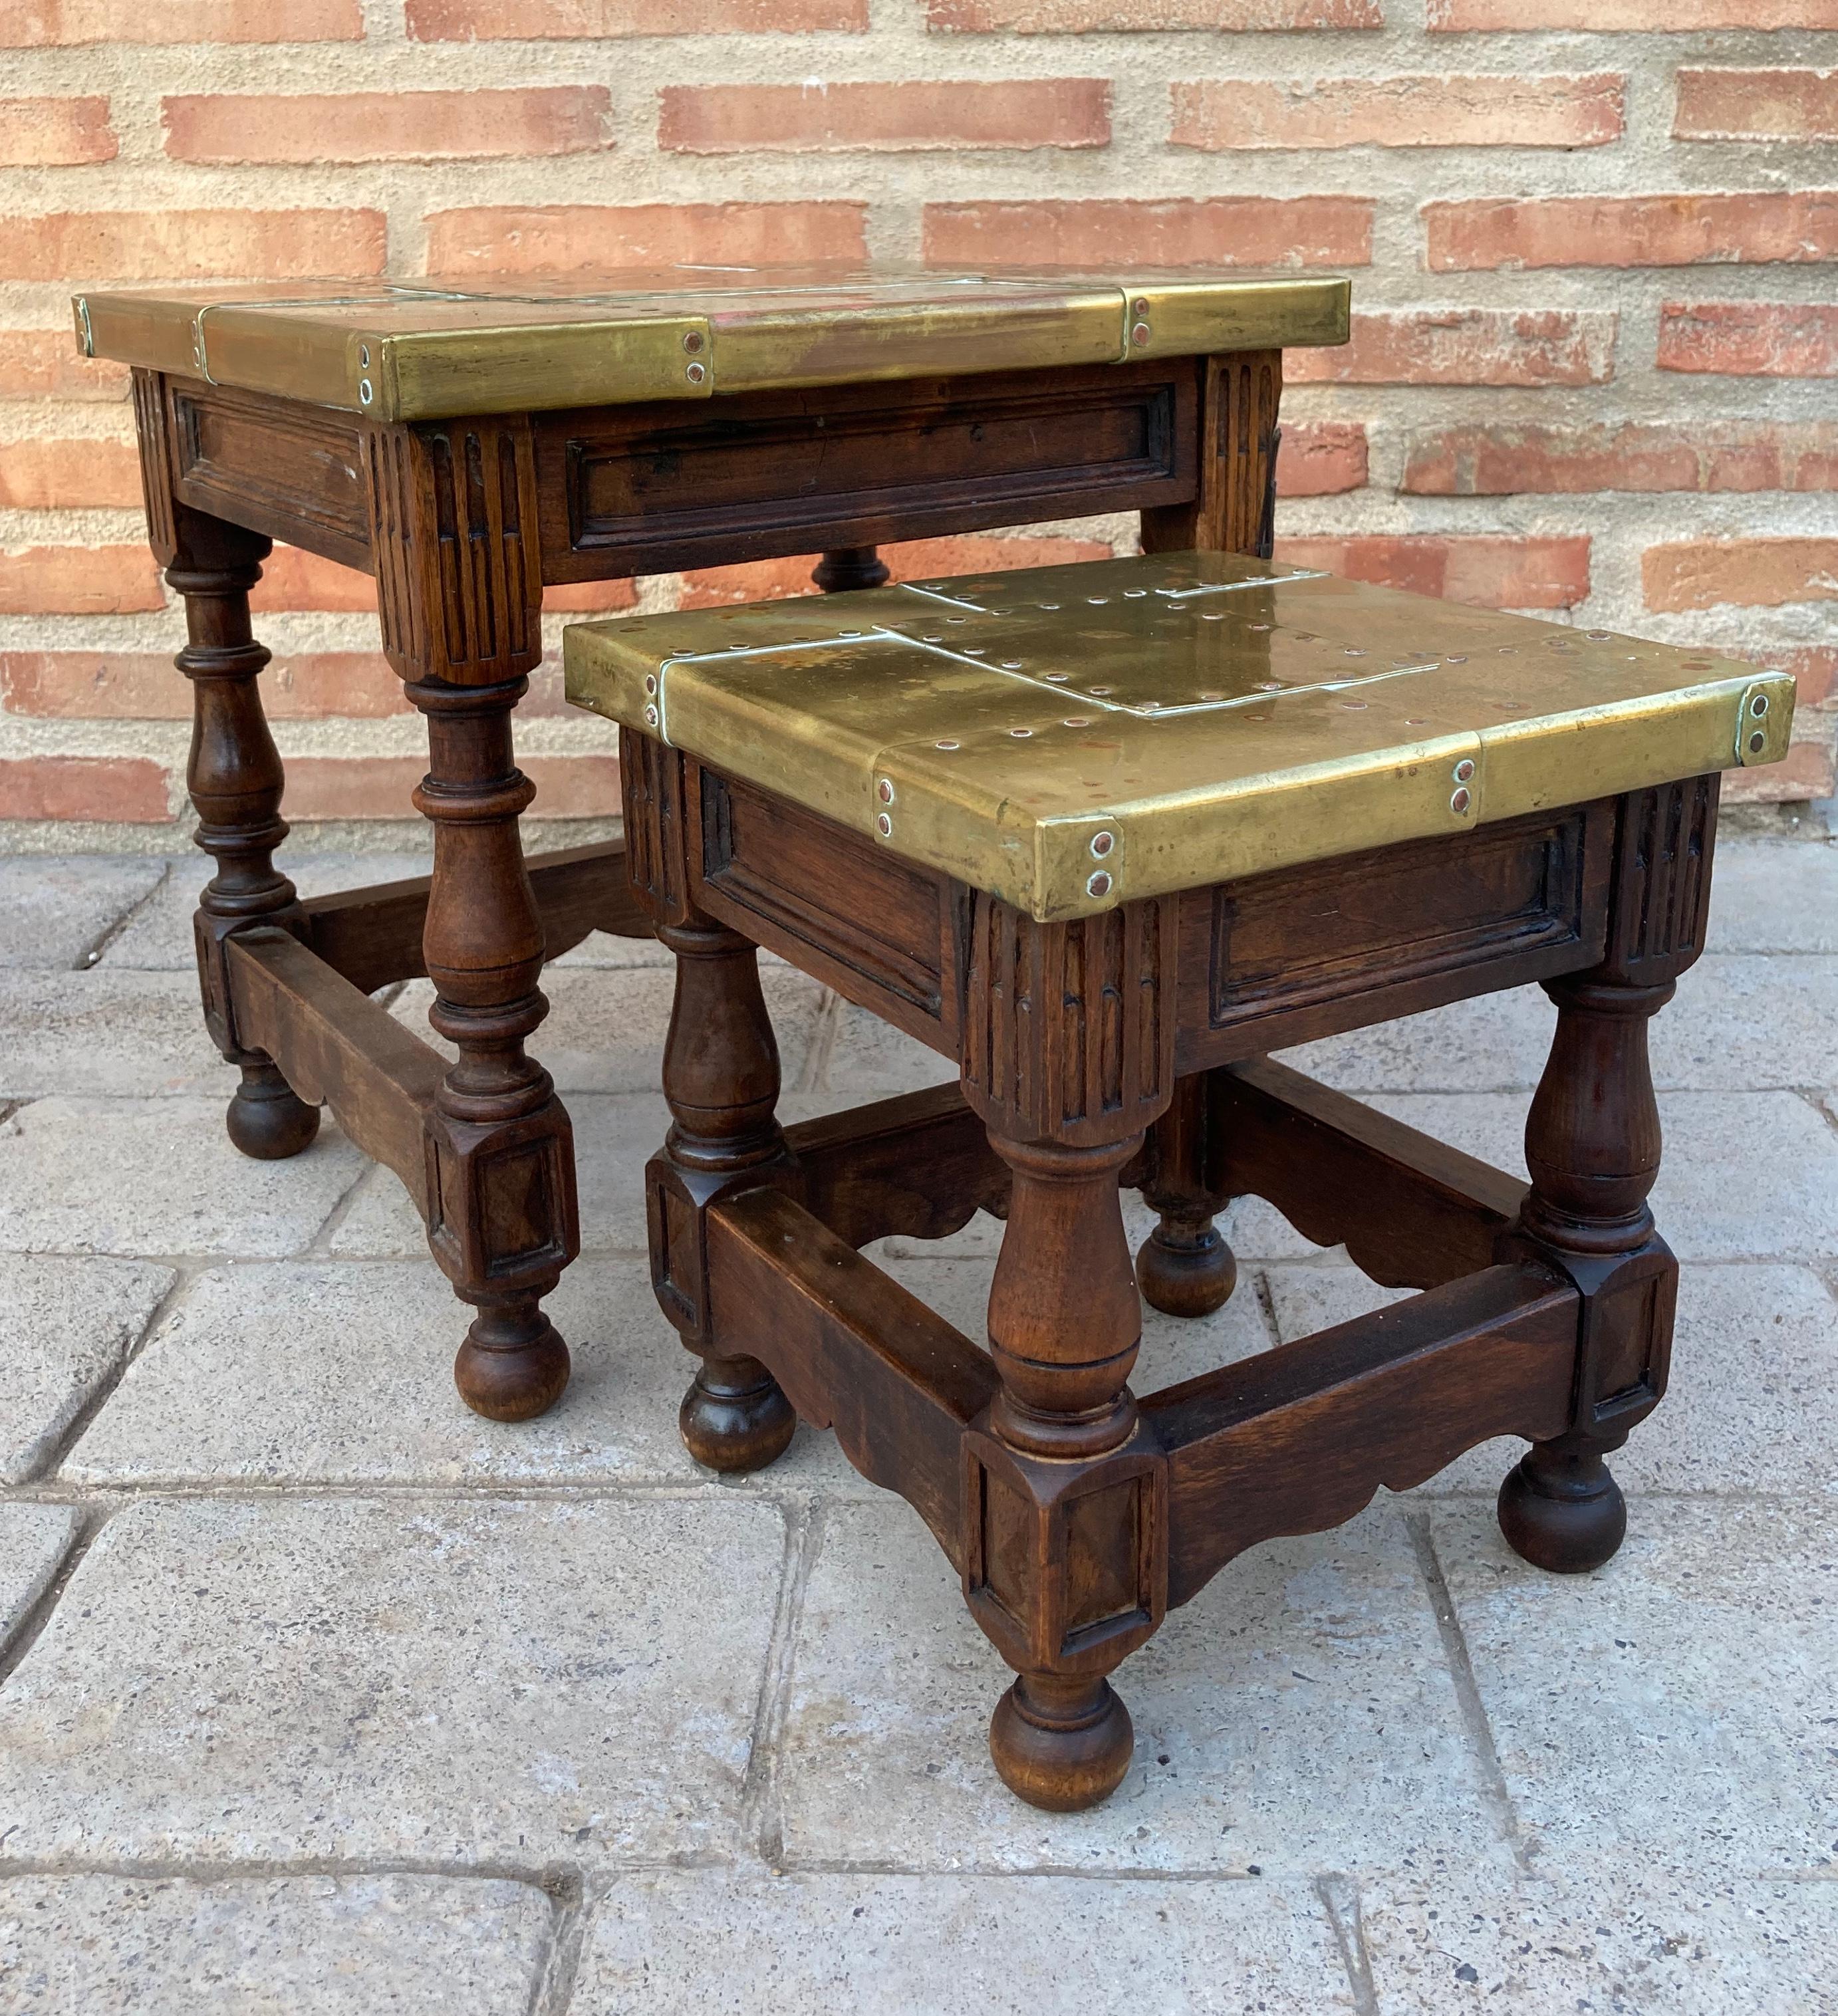 19th Century Spanish Zinc Top Nesting Tables with Turned Legs For Sale 2